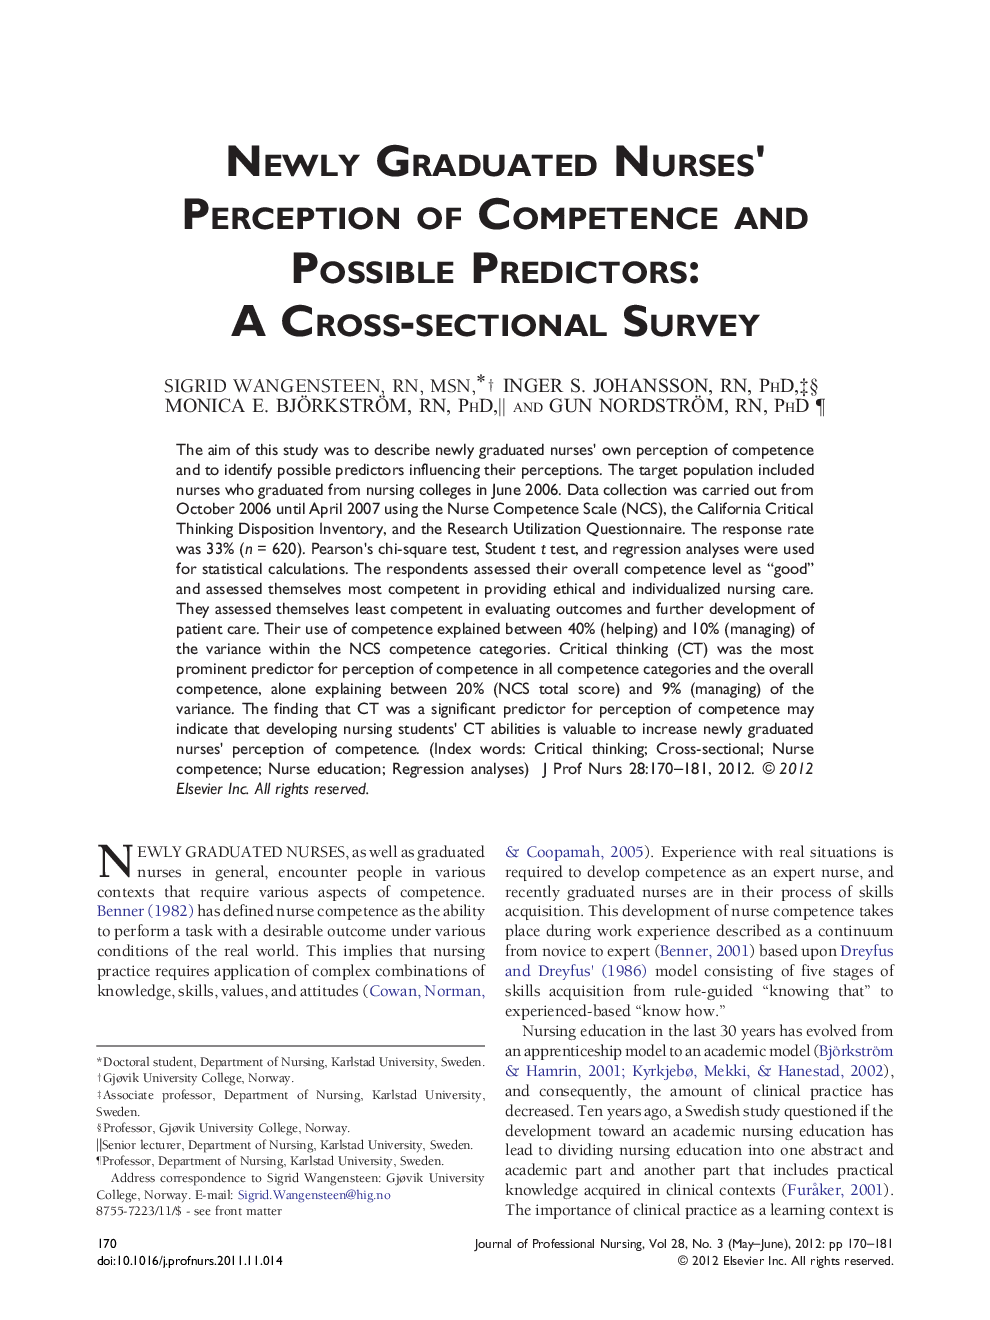 Newly Graduated Nurses' Perception of Competence and Possible Predictors: A Cross-sectional Survey